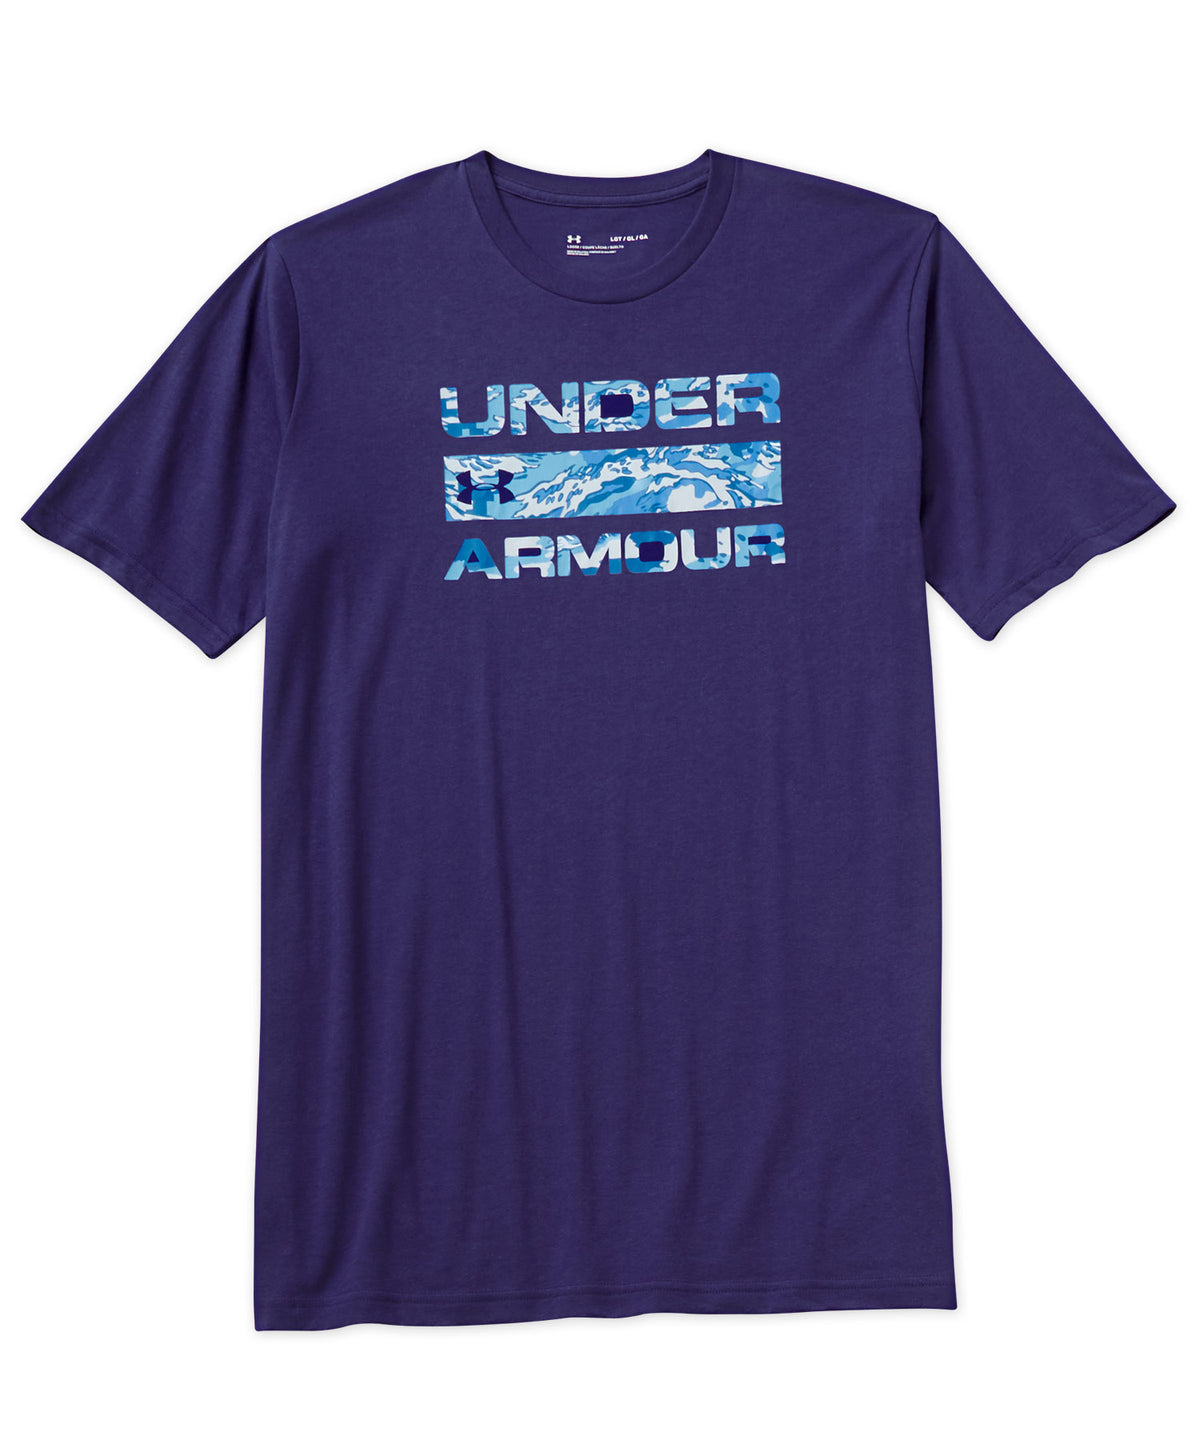 Under Armour Sportstyle Short-Sleeve Graphic Print Tee, Big & Tall